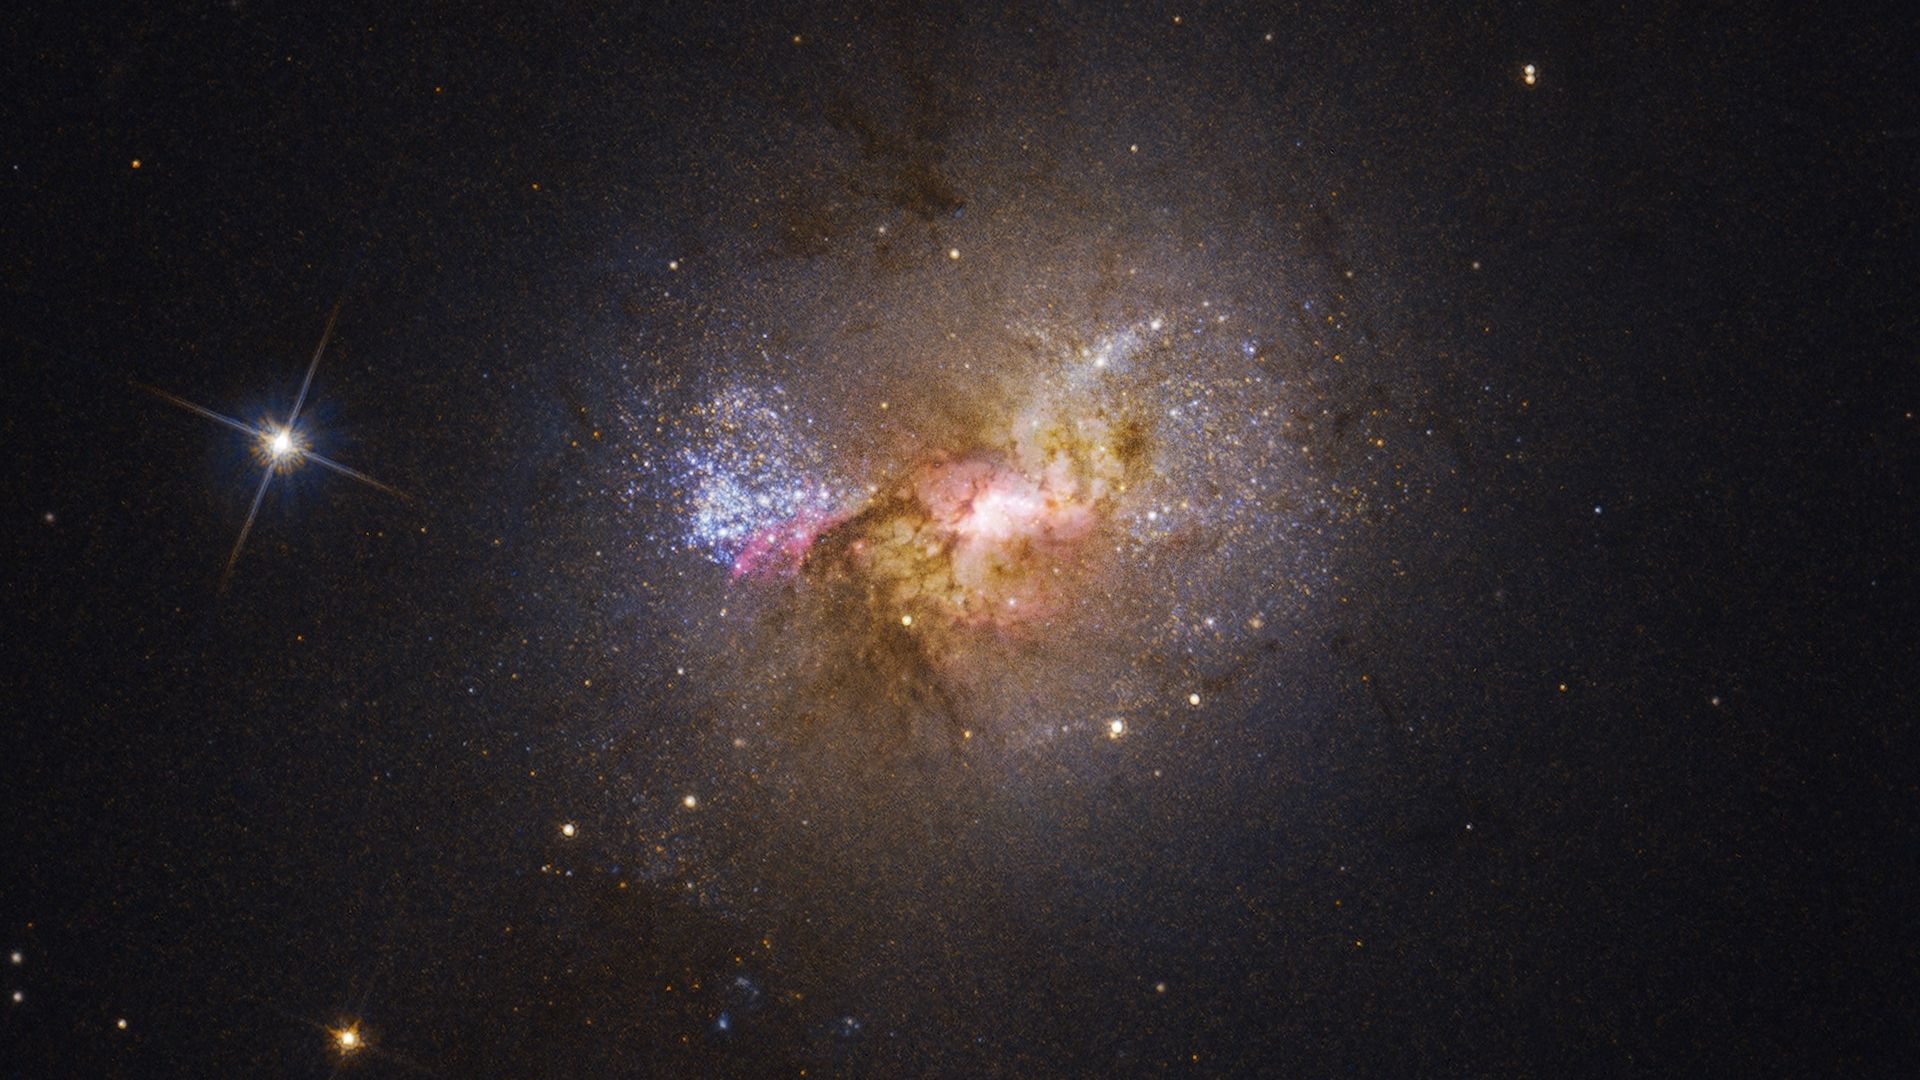 Clouds surrounding a black hole and bursting star formation in blue, red and gold